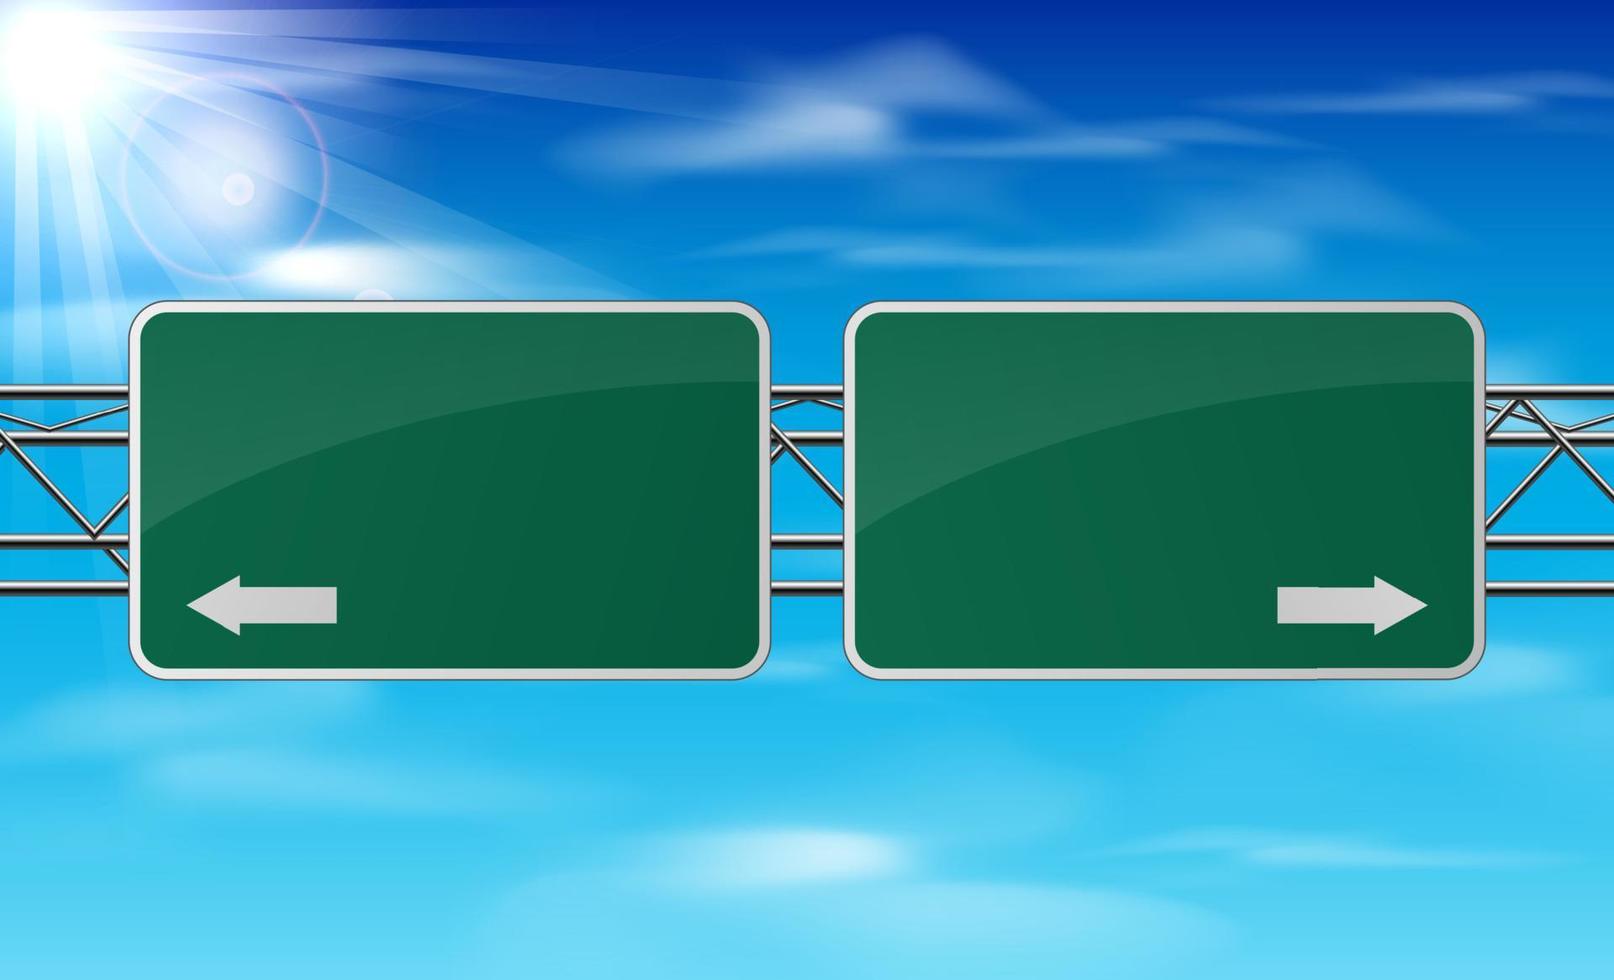 Blank green traffic road sign on sky background vector